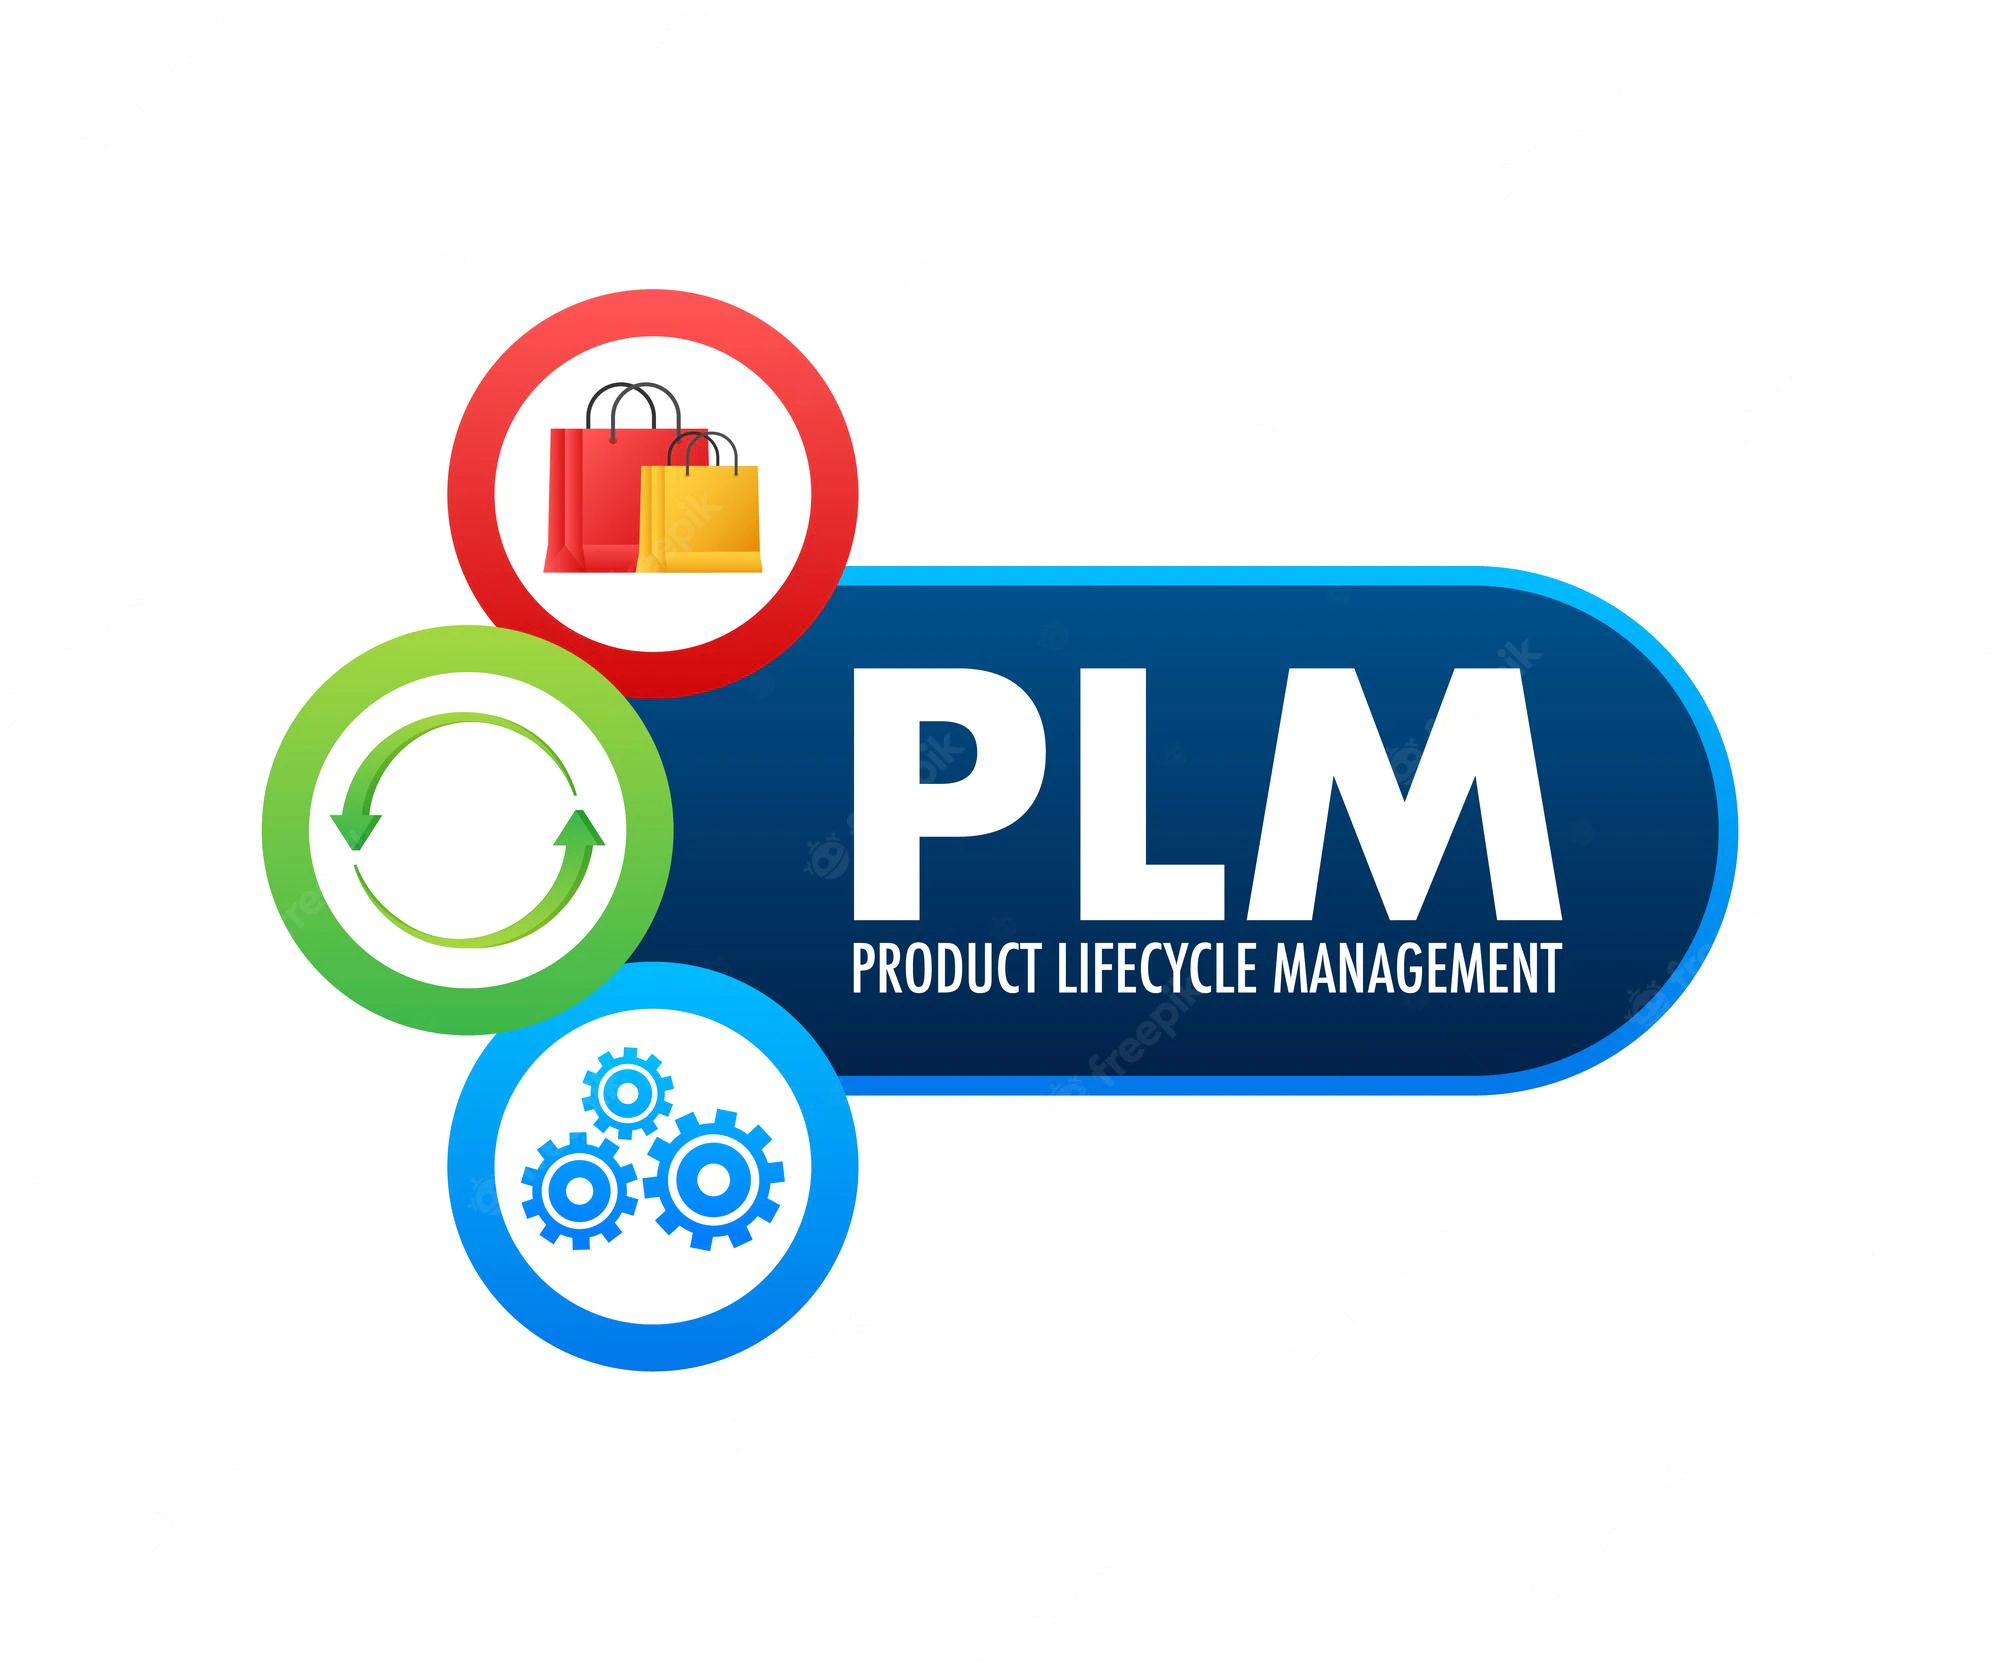 Why Implement Product Lifecycle Management in the Pharmaceutical Industry?